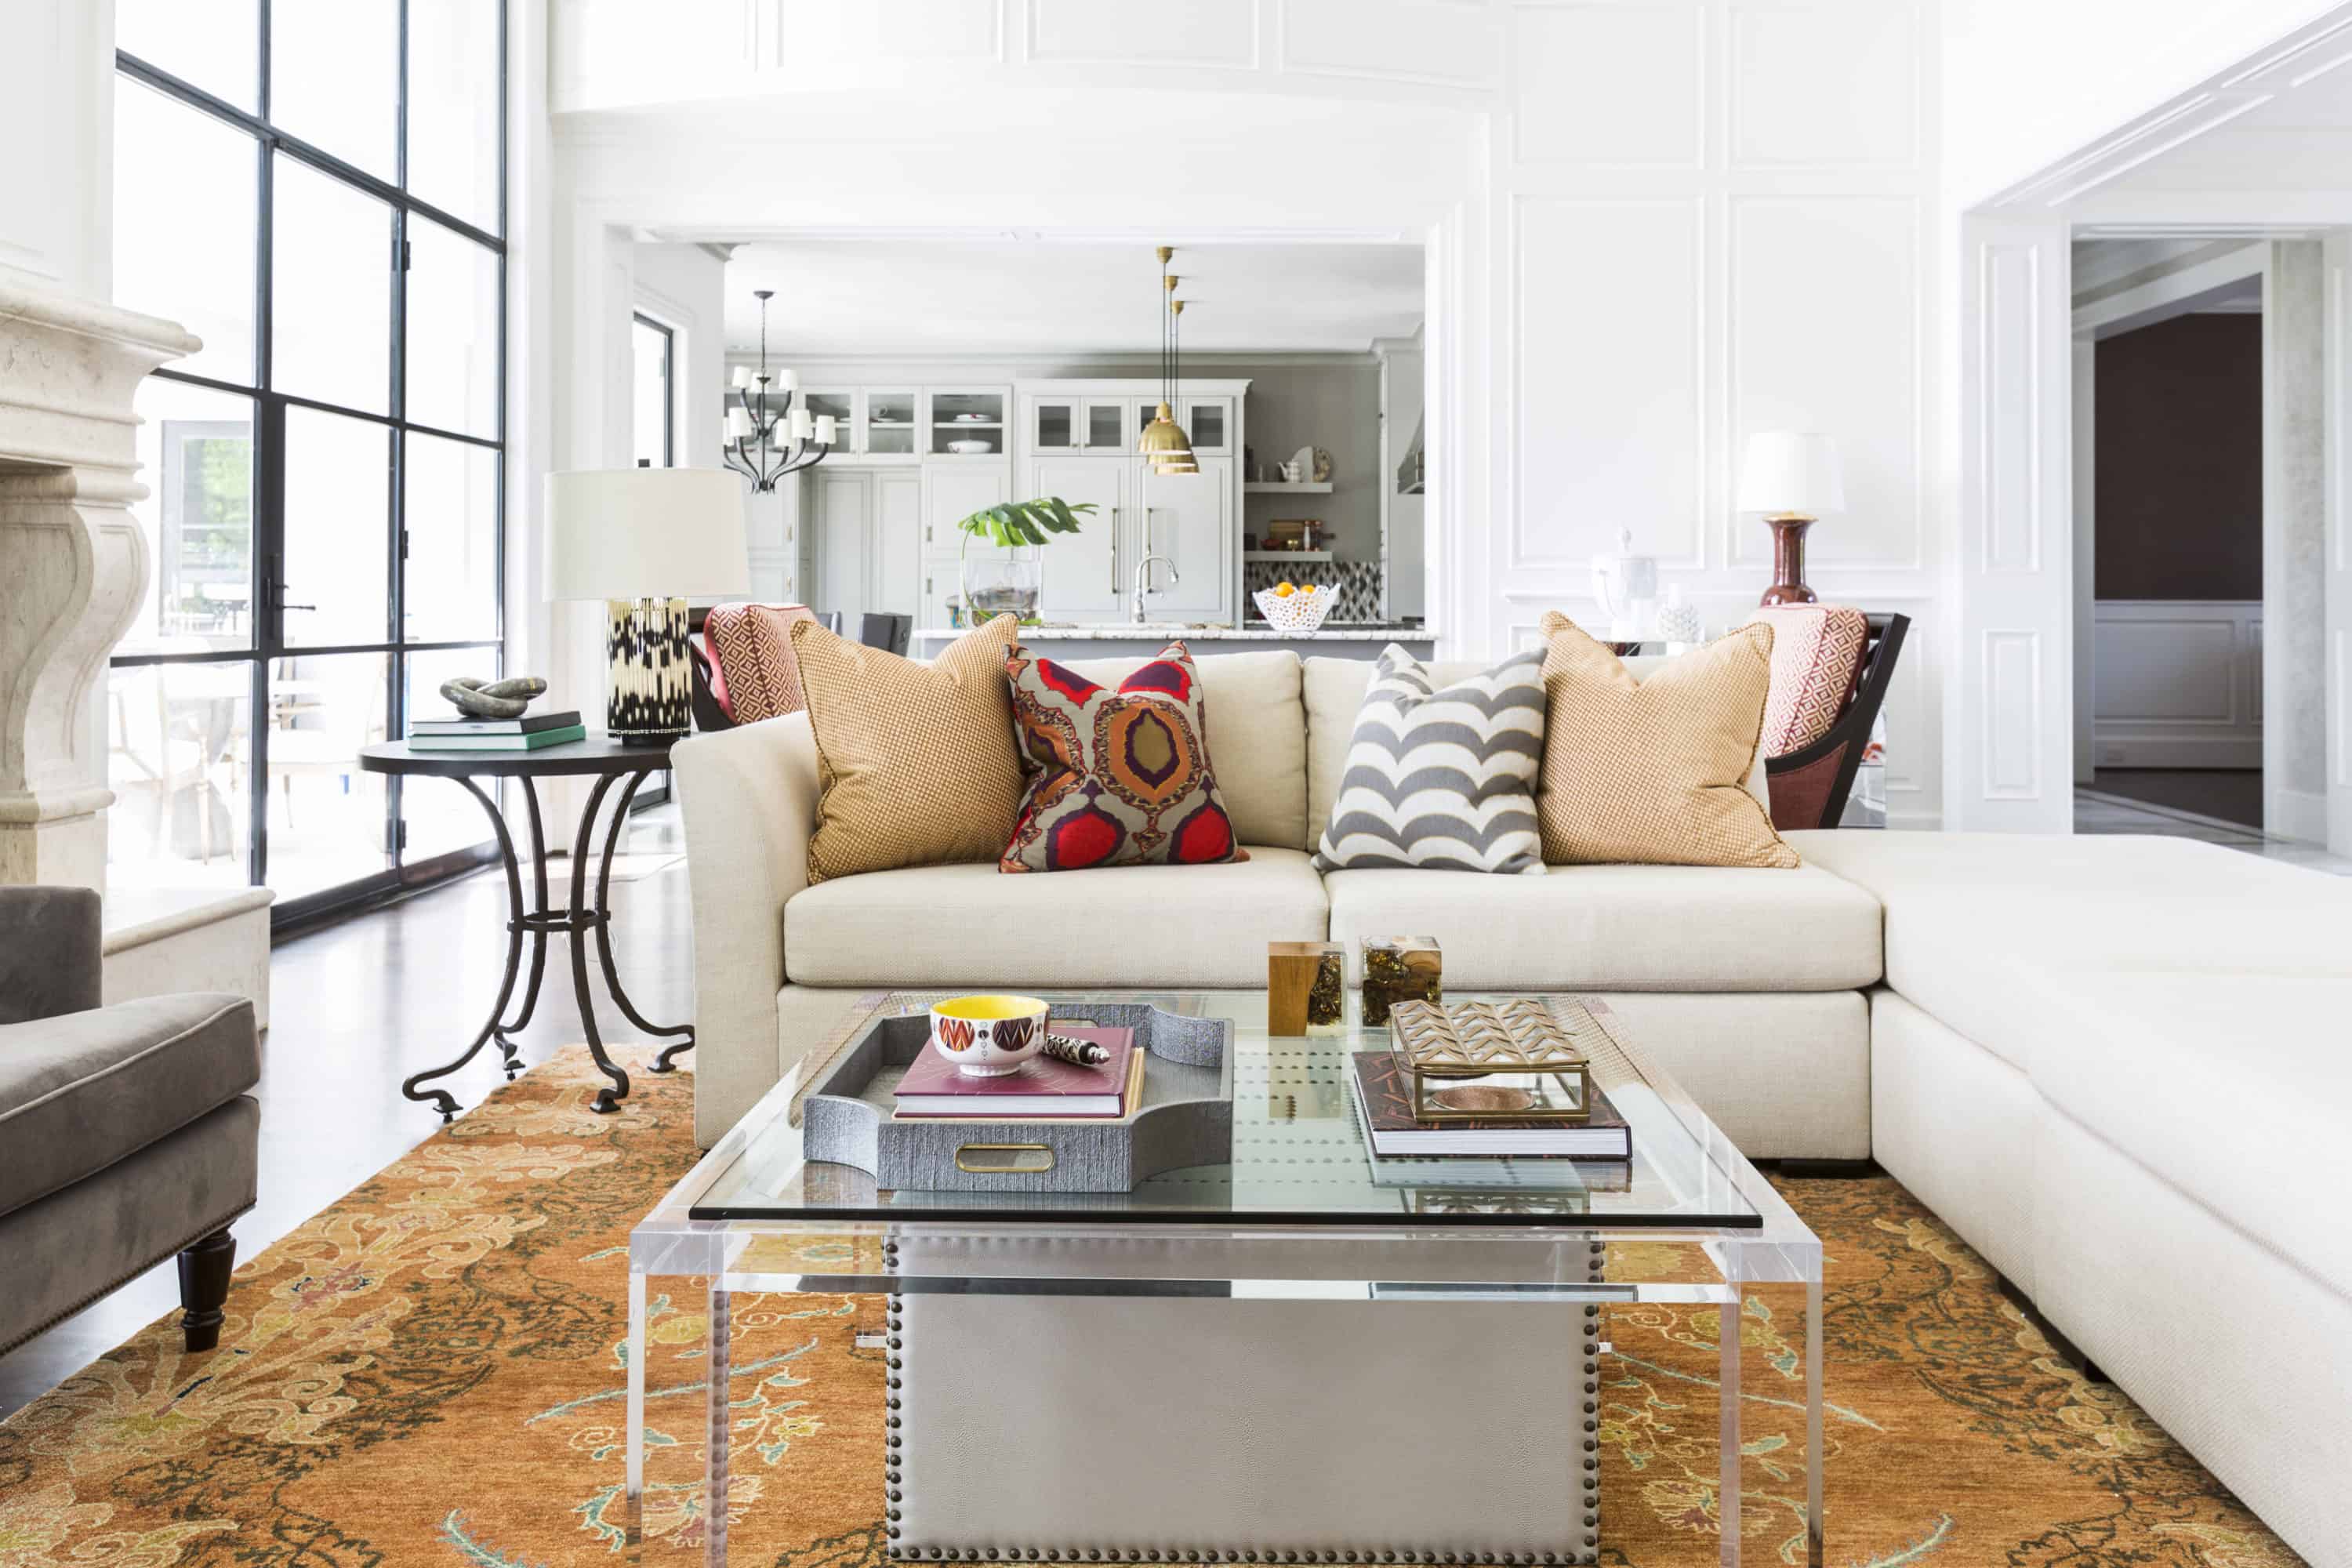 Textures and patterns colorfully play against each other in this living room